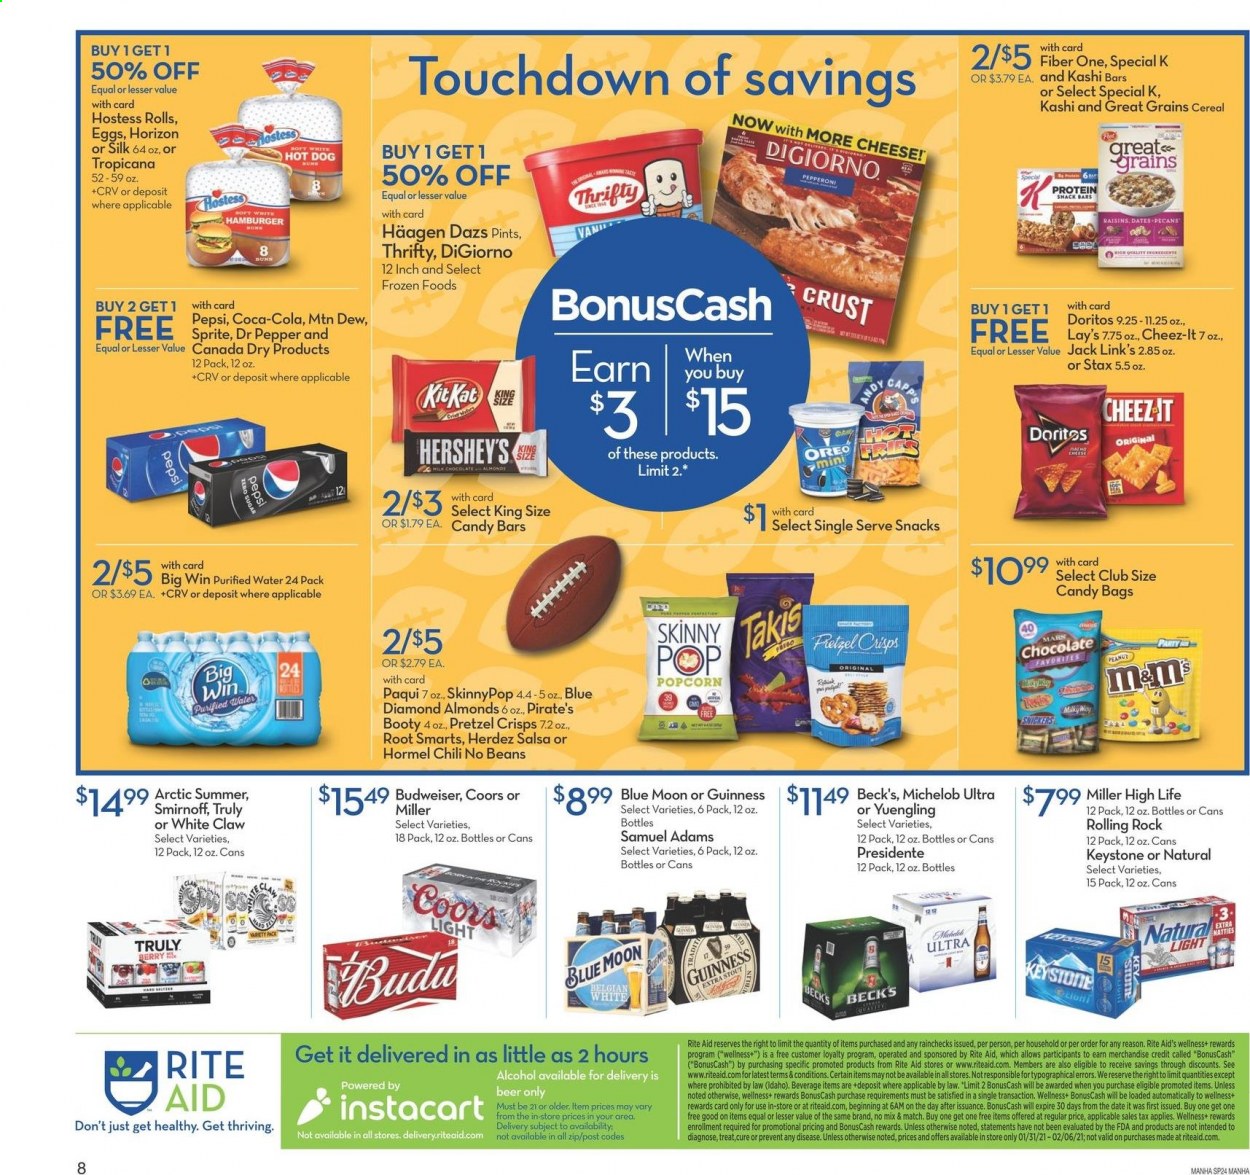 thumbnail - RITE AID Flyer - 01/31/2021 - 02/06/2021 - Sales products - hot dog, hamburger, Hormel, Oreo, Silk, Hershey's, Häagen-Dazs, chocolate, Mars, Doritos, Lay’s, popcorn, Cheez-It, pretzel crisps, Jack Link's, beans, cereals, Fiber One, almonds, raisins, peanuts, pecans, dried dates, Blue Diamond, Canada Dry, Coca-Cola, Mountain Dew, Sprite, Pepsi, Dr. Pepper, purified water, alcohol, Smirnoff, White Claw, TRULY, beer, Budweiser, Coors, Blue Moon, Yuengling, Michelob, Guinness, Miller, Beck's, Keystone, bag. Page 3.